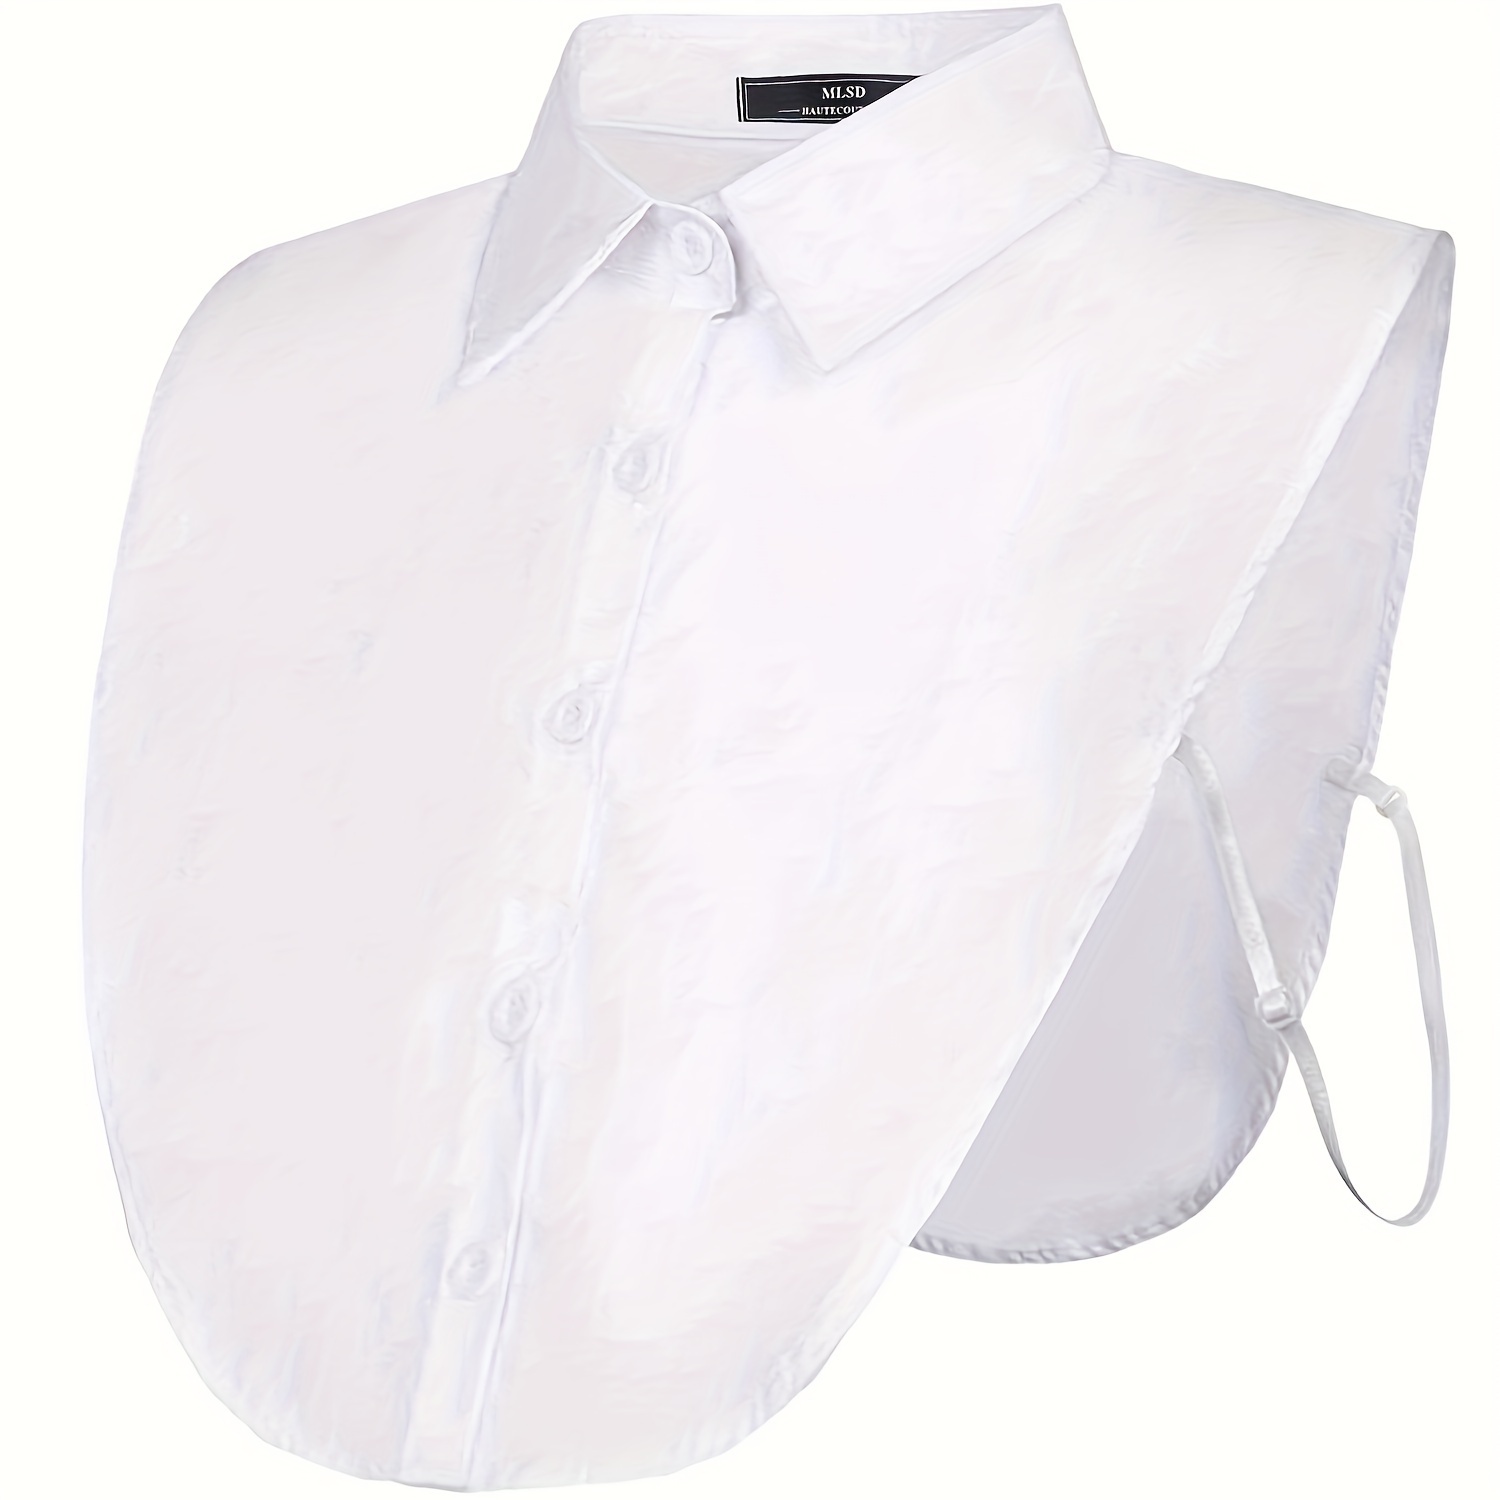 Shirt Collar Extenders (4pcs, White and Black) Make your shirt comfortable  again